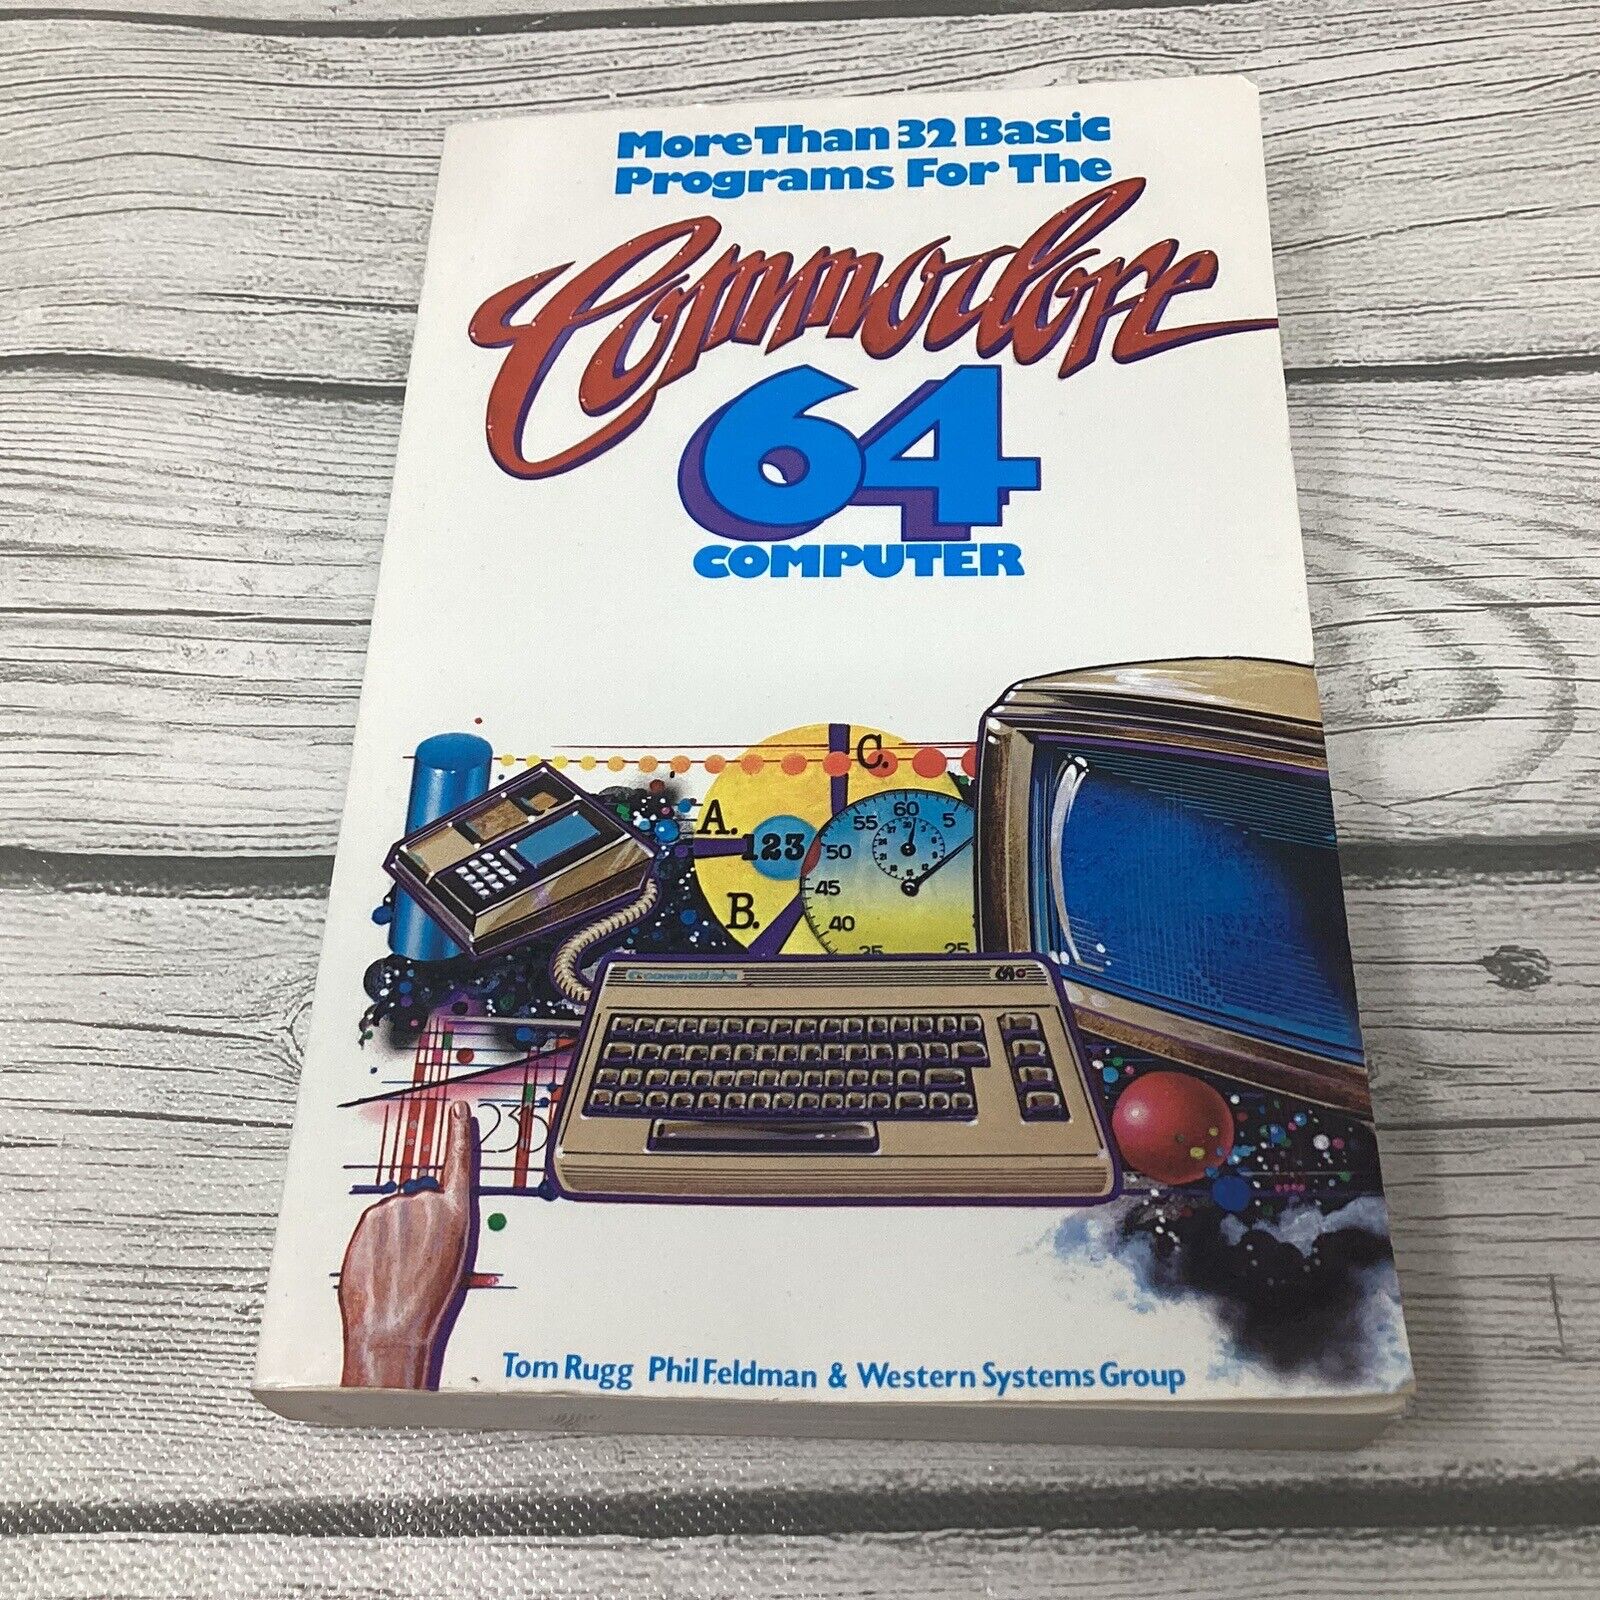 More Than 32 Basic Programs For The Commodore 64 Computer Book Rugg Feldman 1983